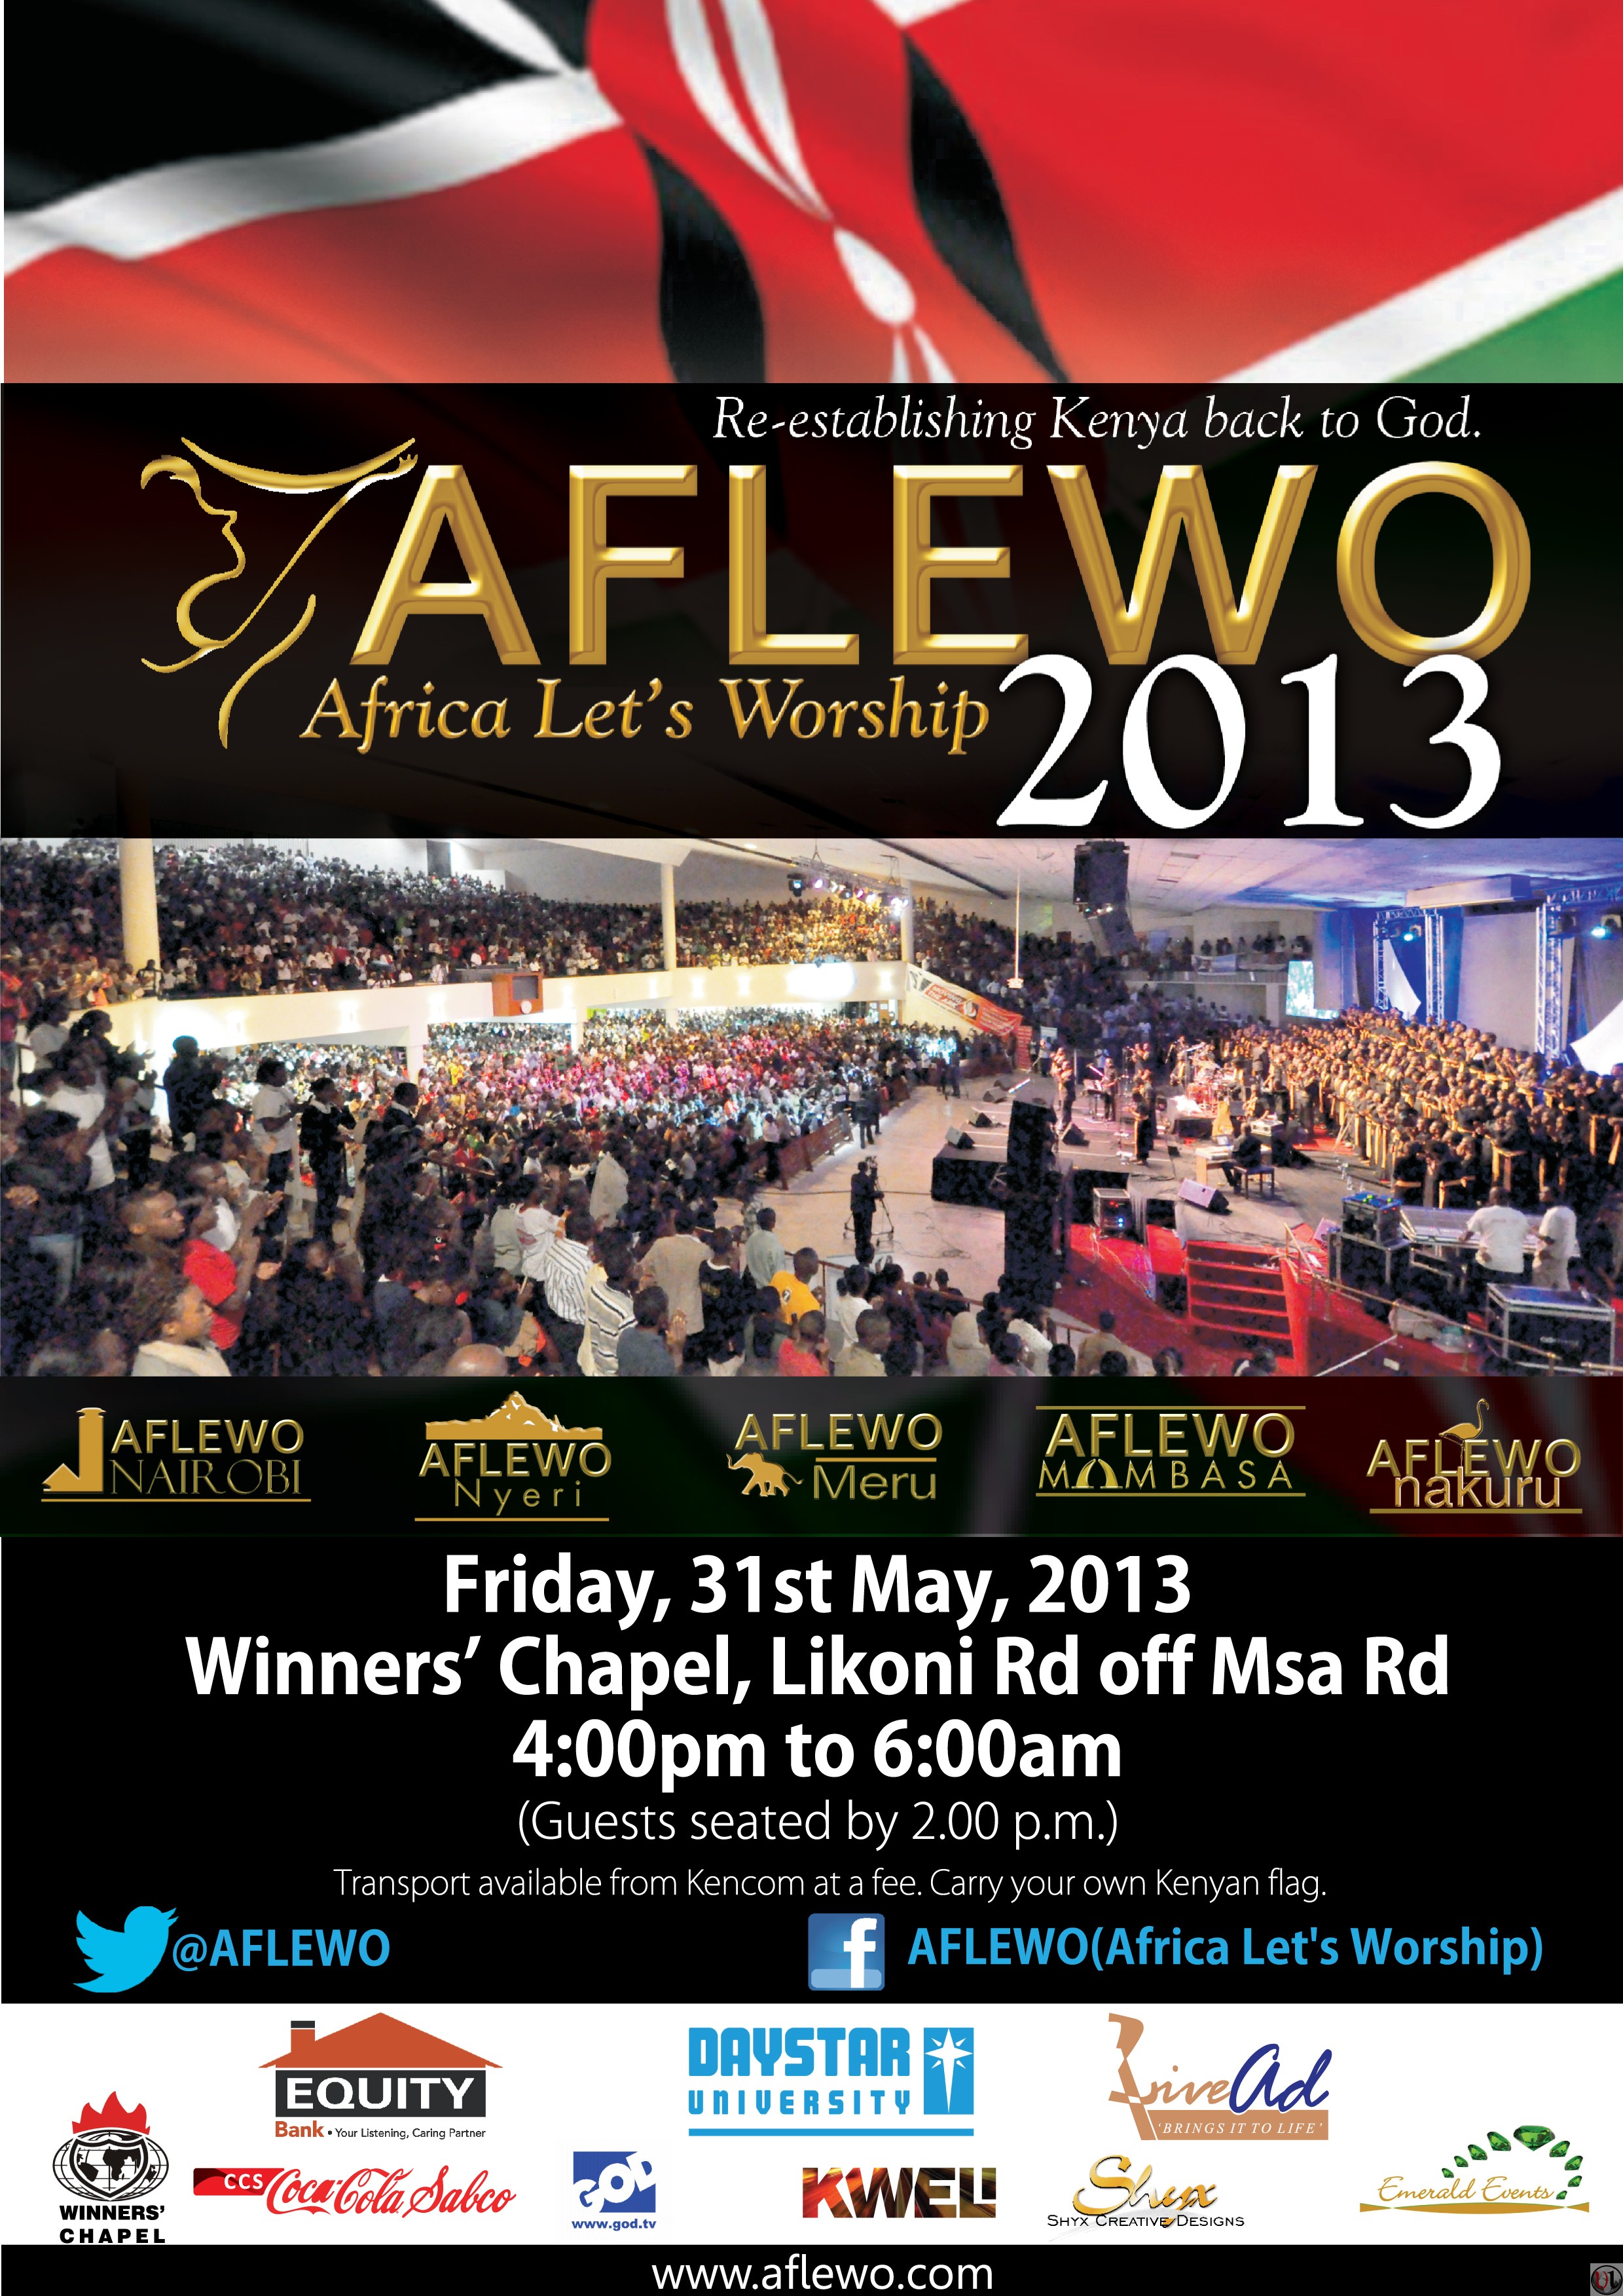 AFLEWO 2013 POSTER